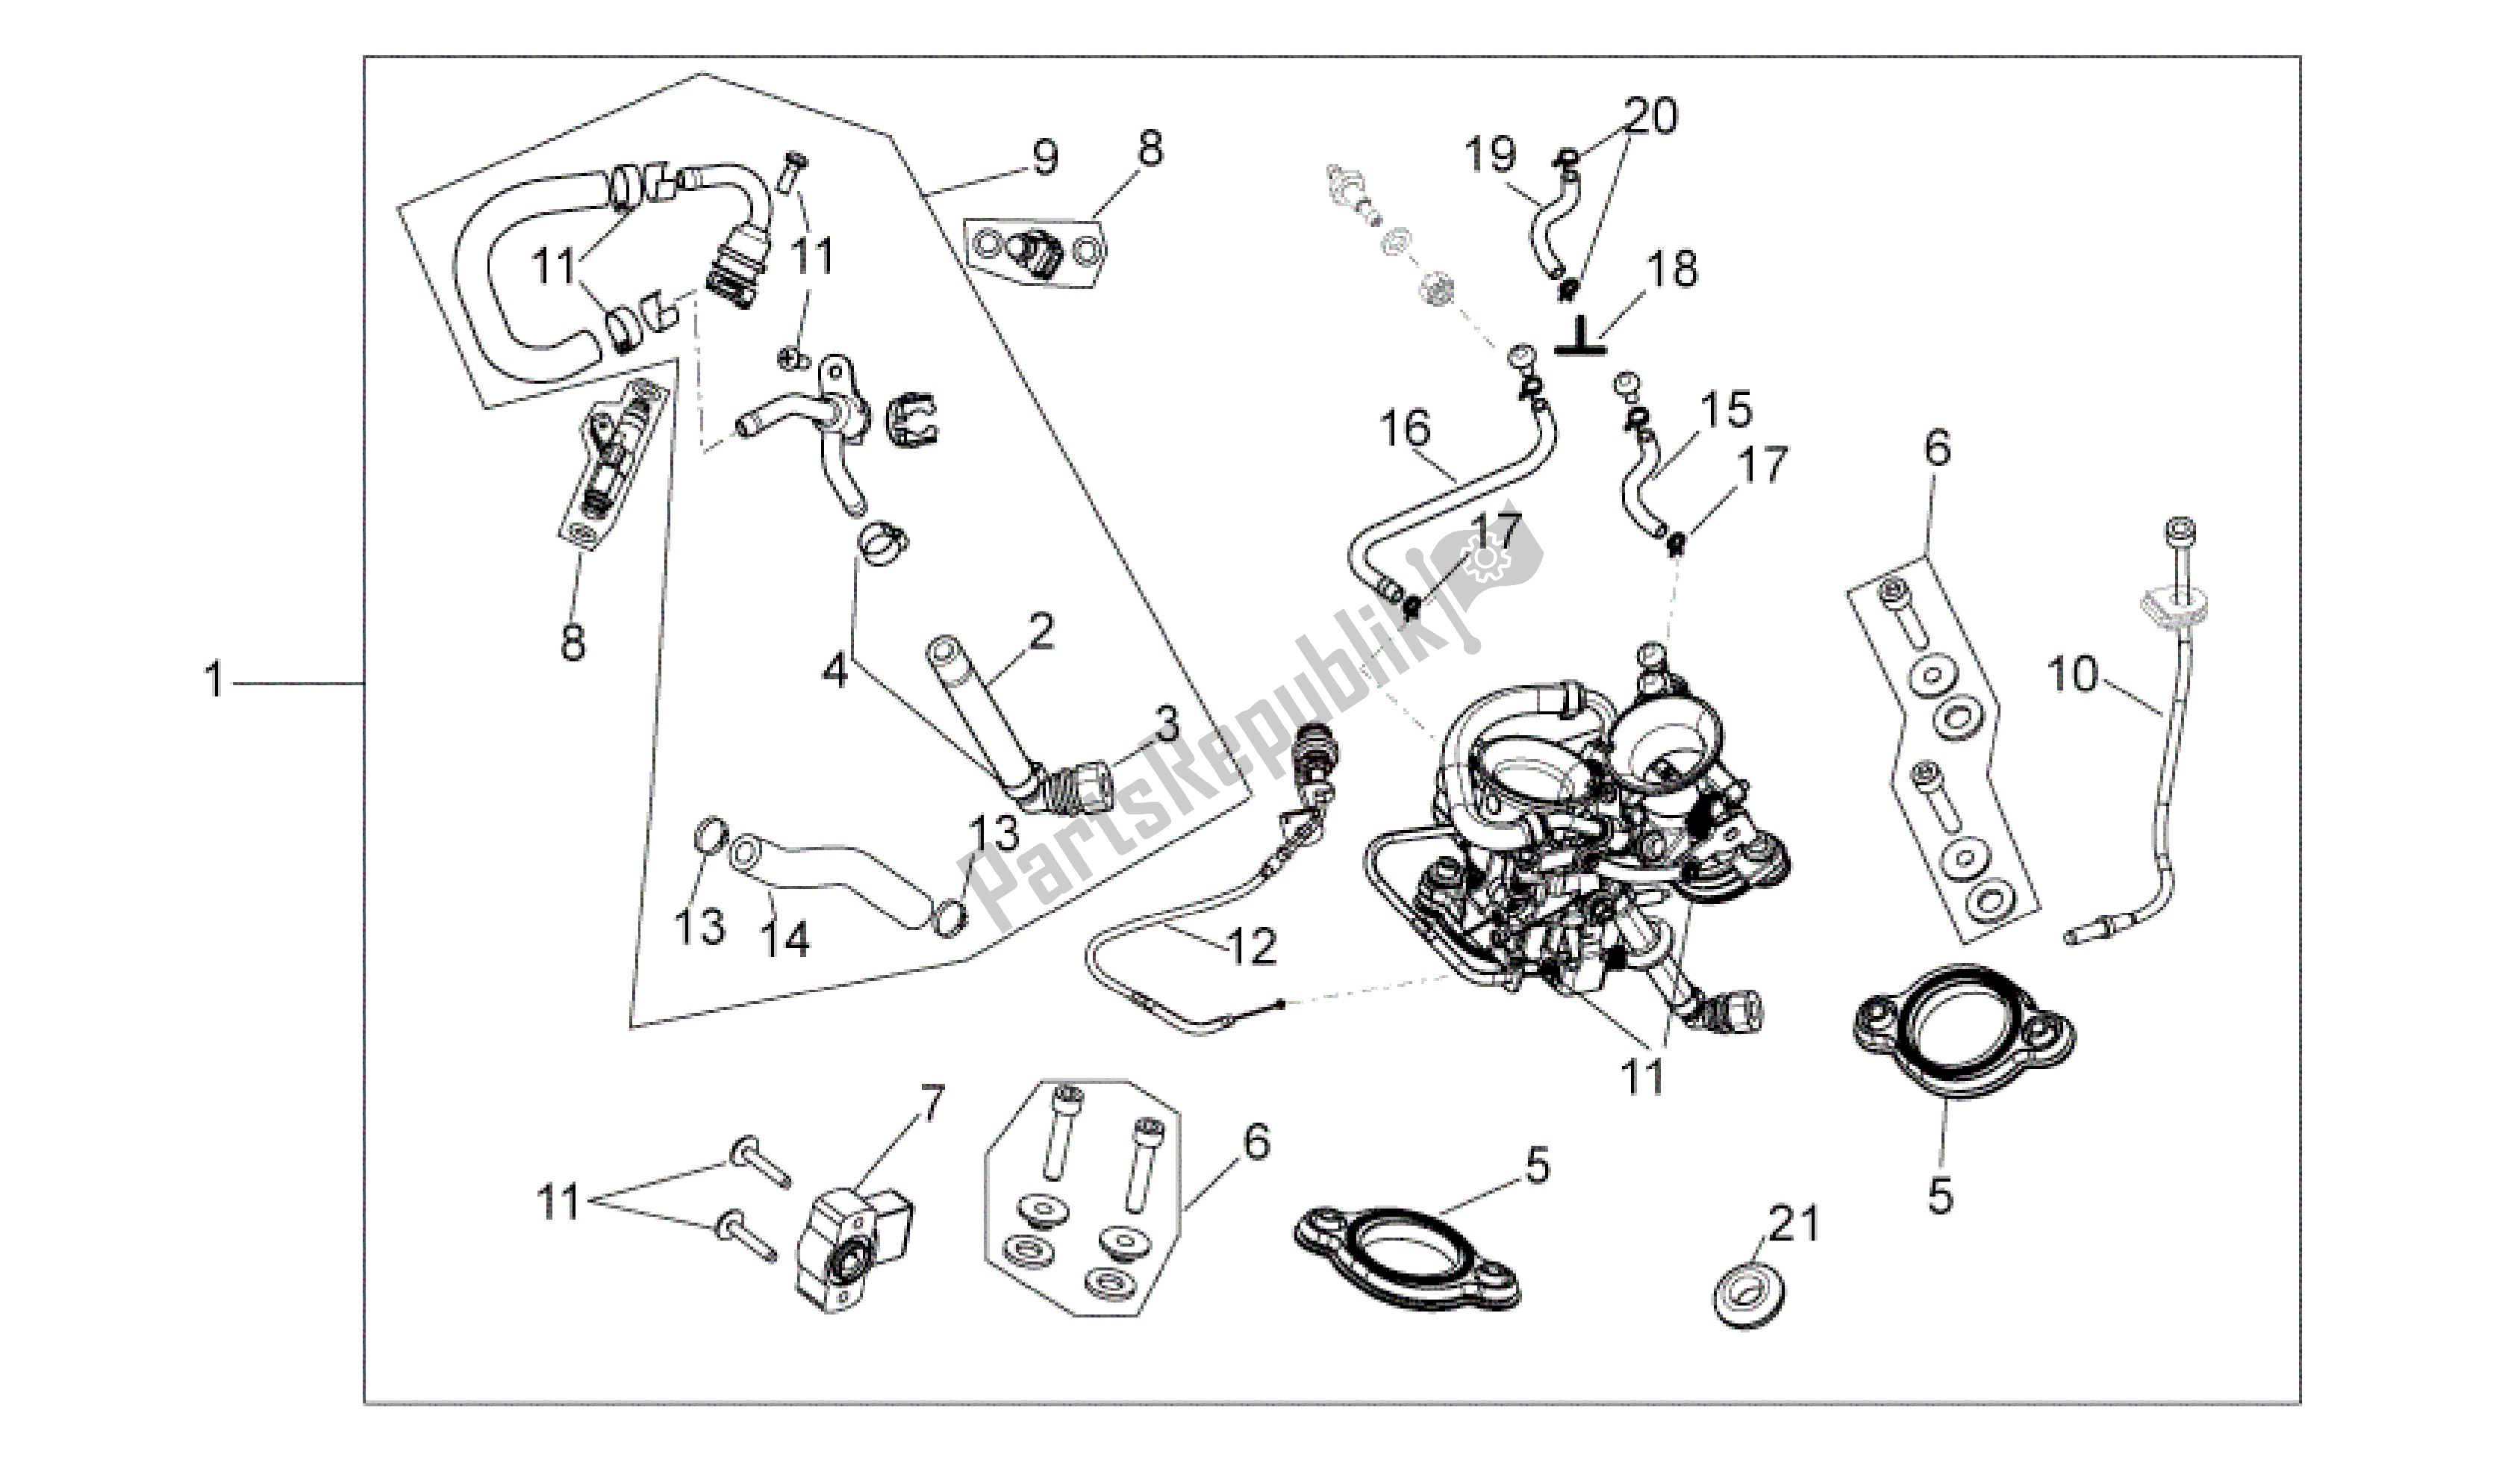 All parts for the Throttle Body of the Aprilia RXV 550 2009 - 2011